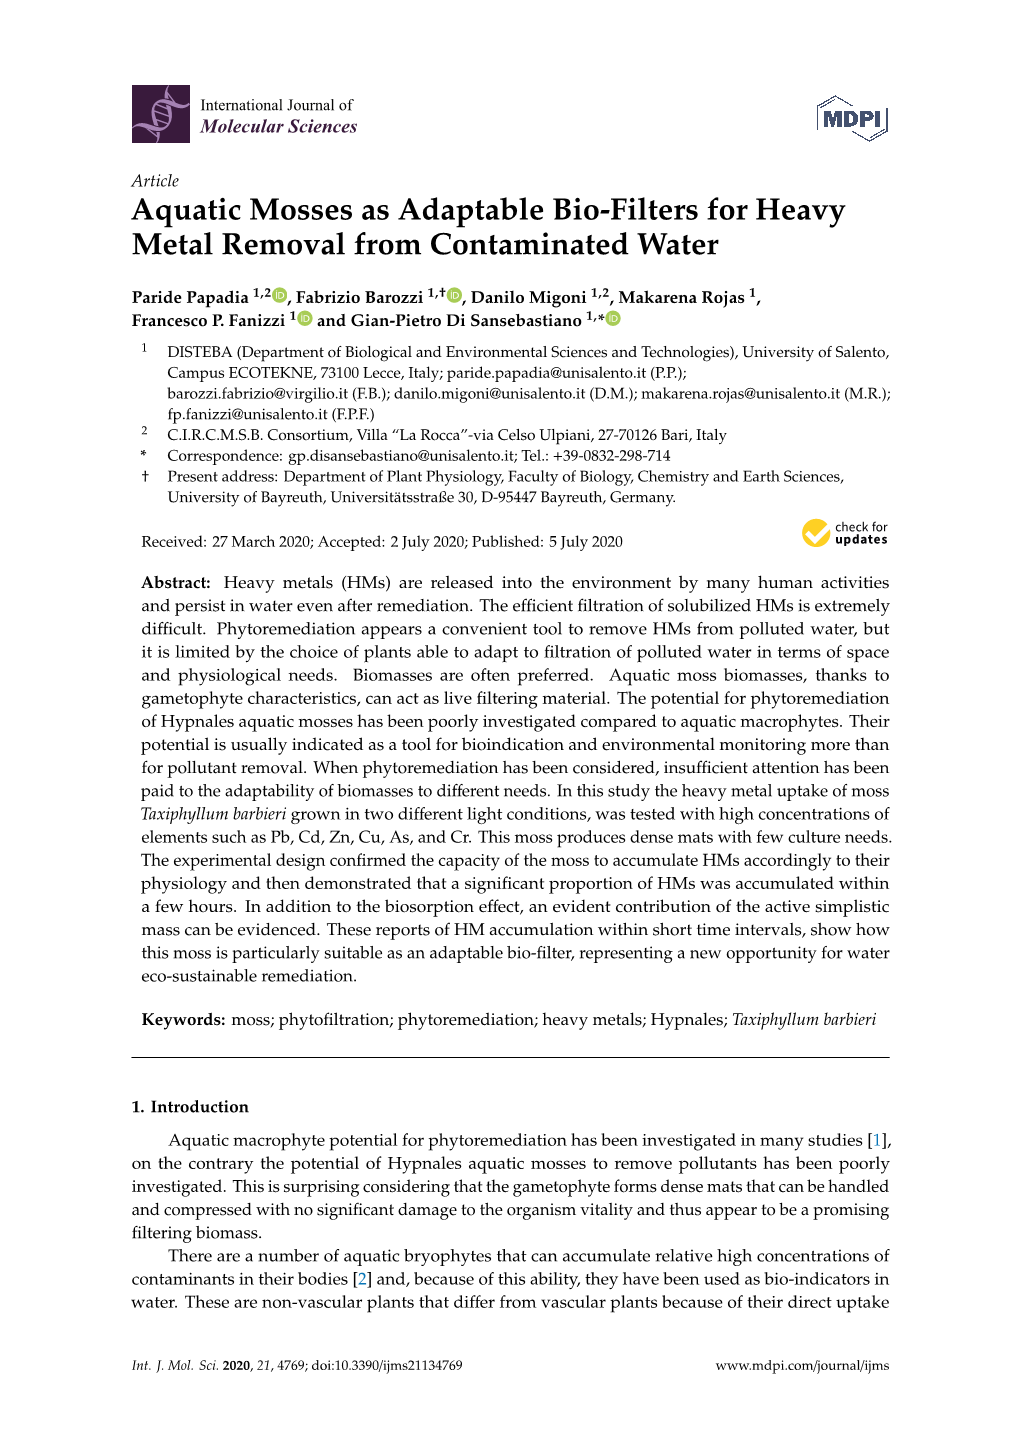 Aquatic Mosses As Adaptable Bio-Filters for Heavy Metal Removal from Contaminated Water